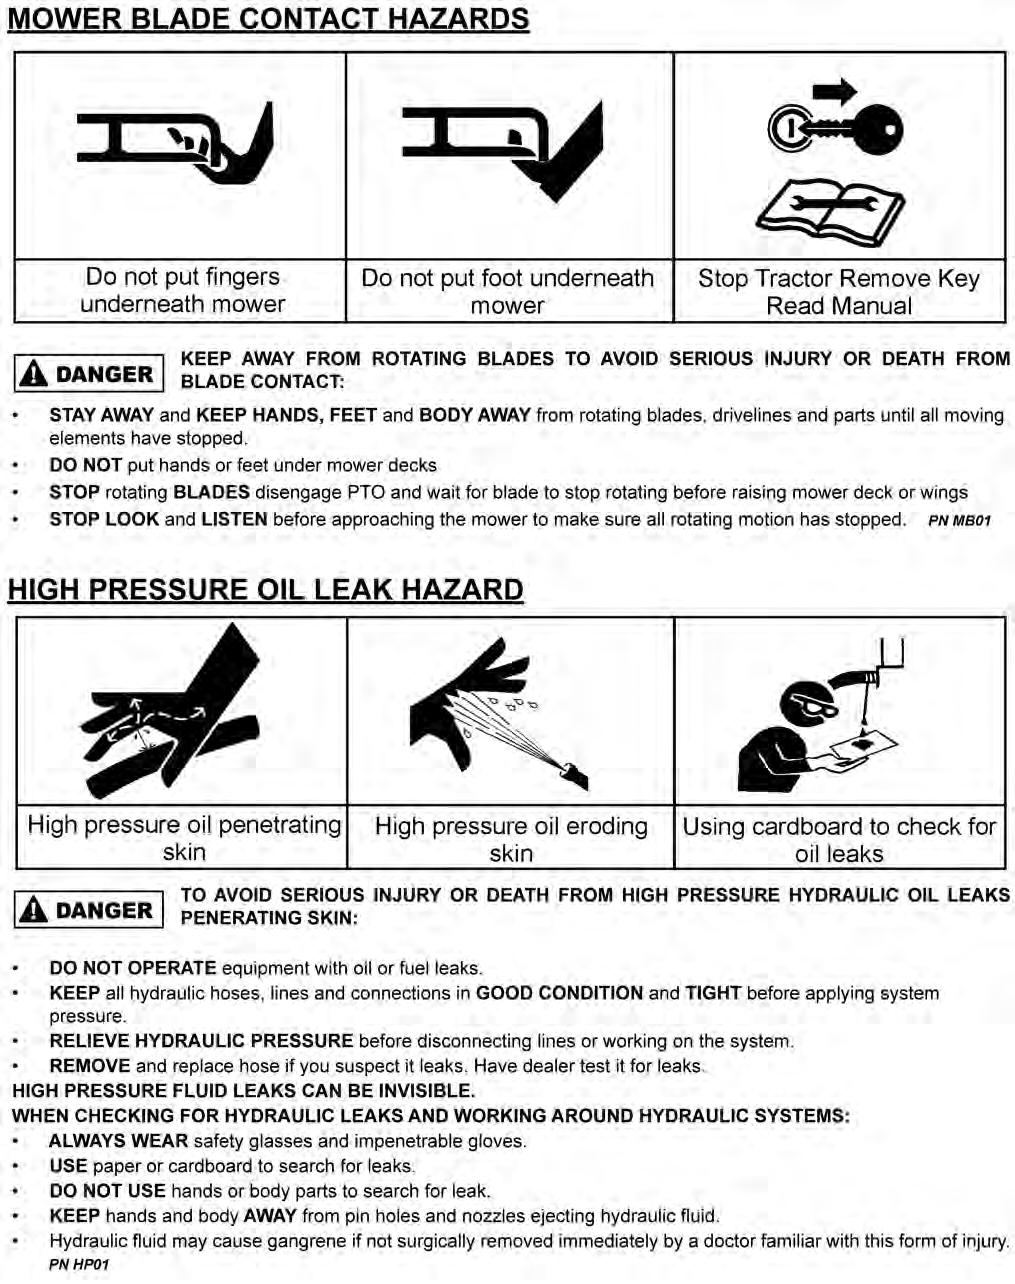 SAFETY MOWER BLADE CONTACT HAZARDS SAFETY KEEP AWAY FROM ROTATING BLADES TO AVOID SERIOUS INJURY OR